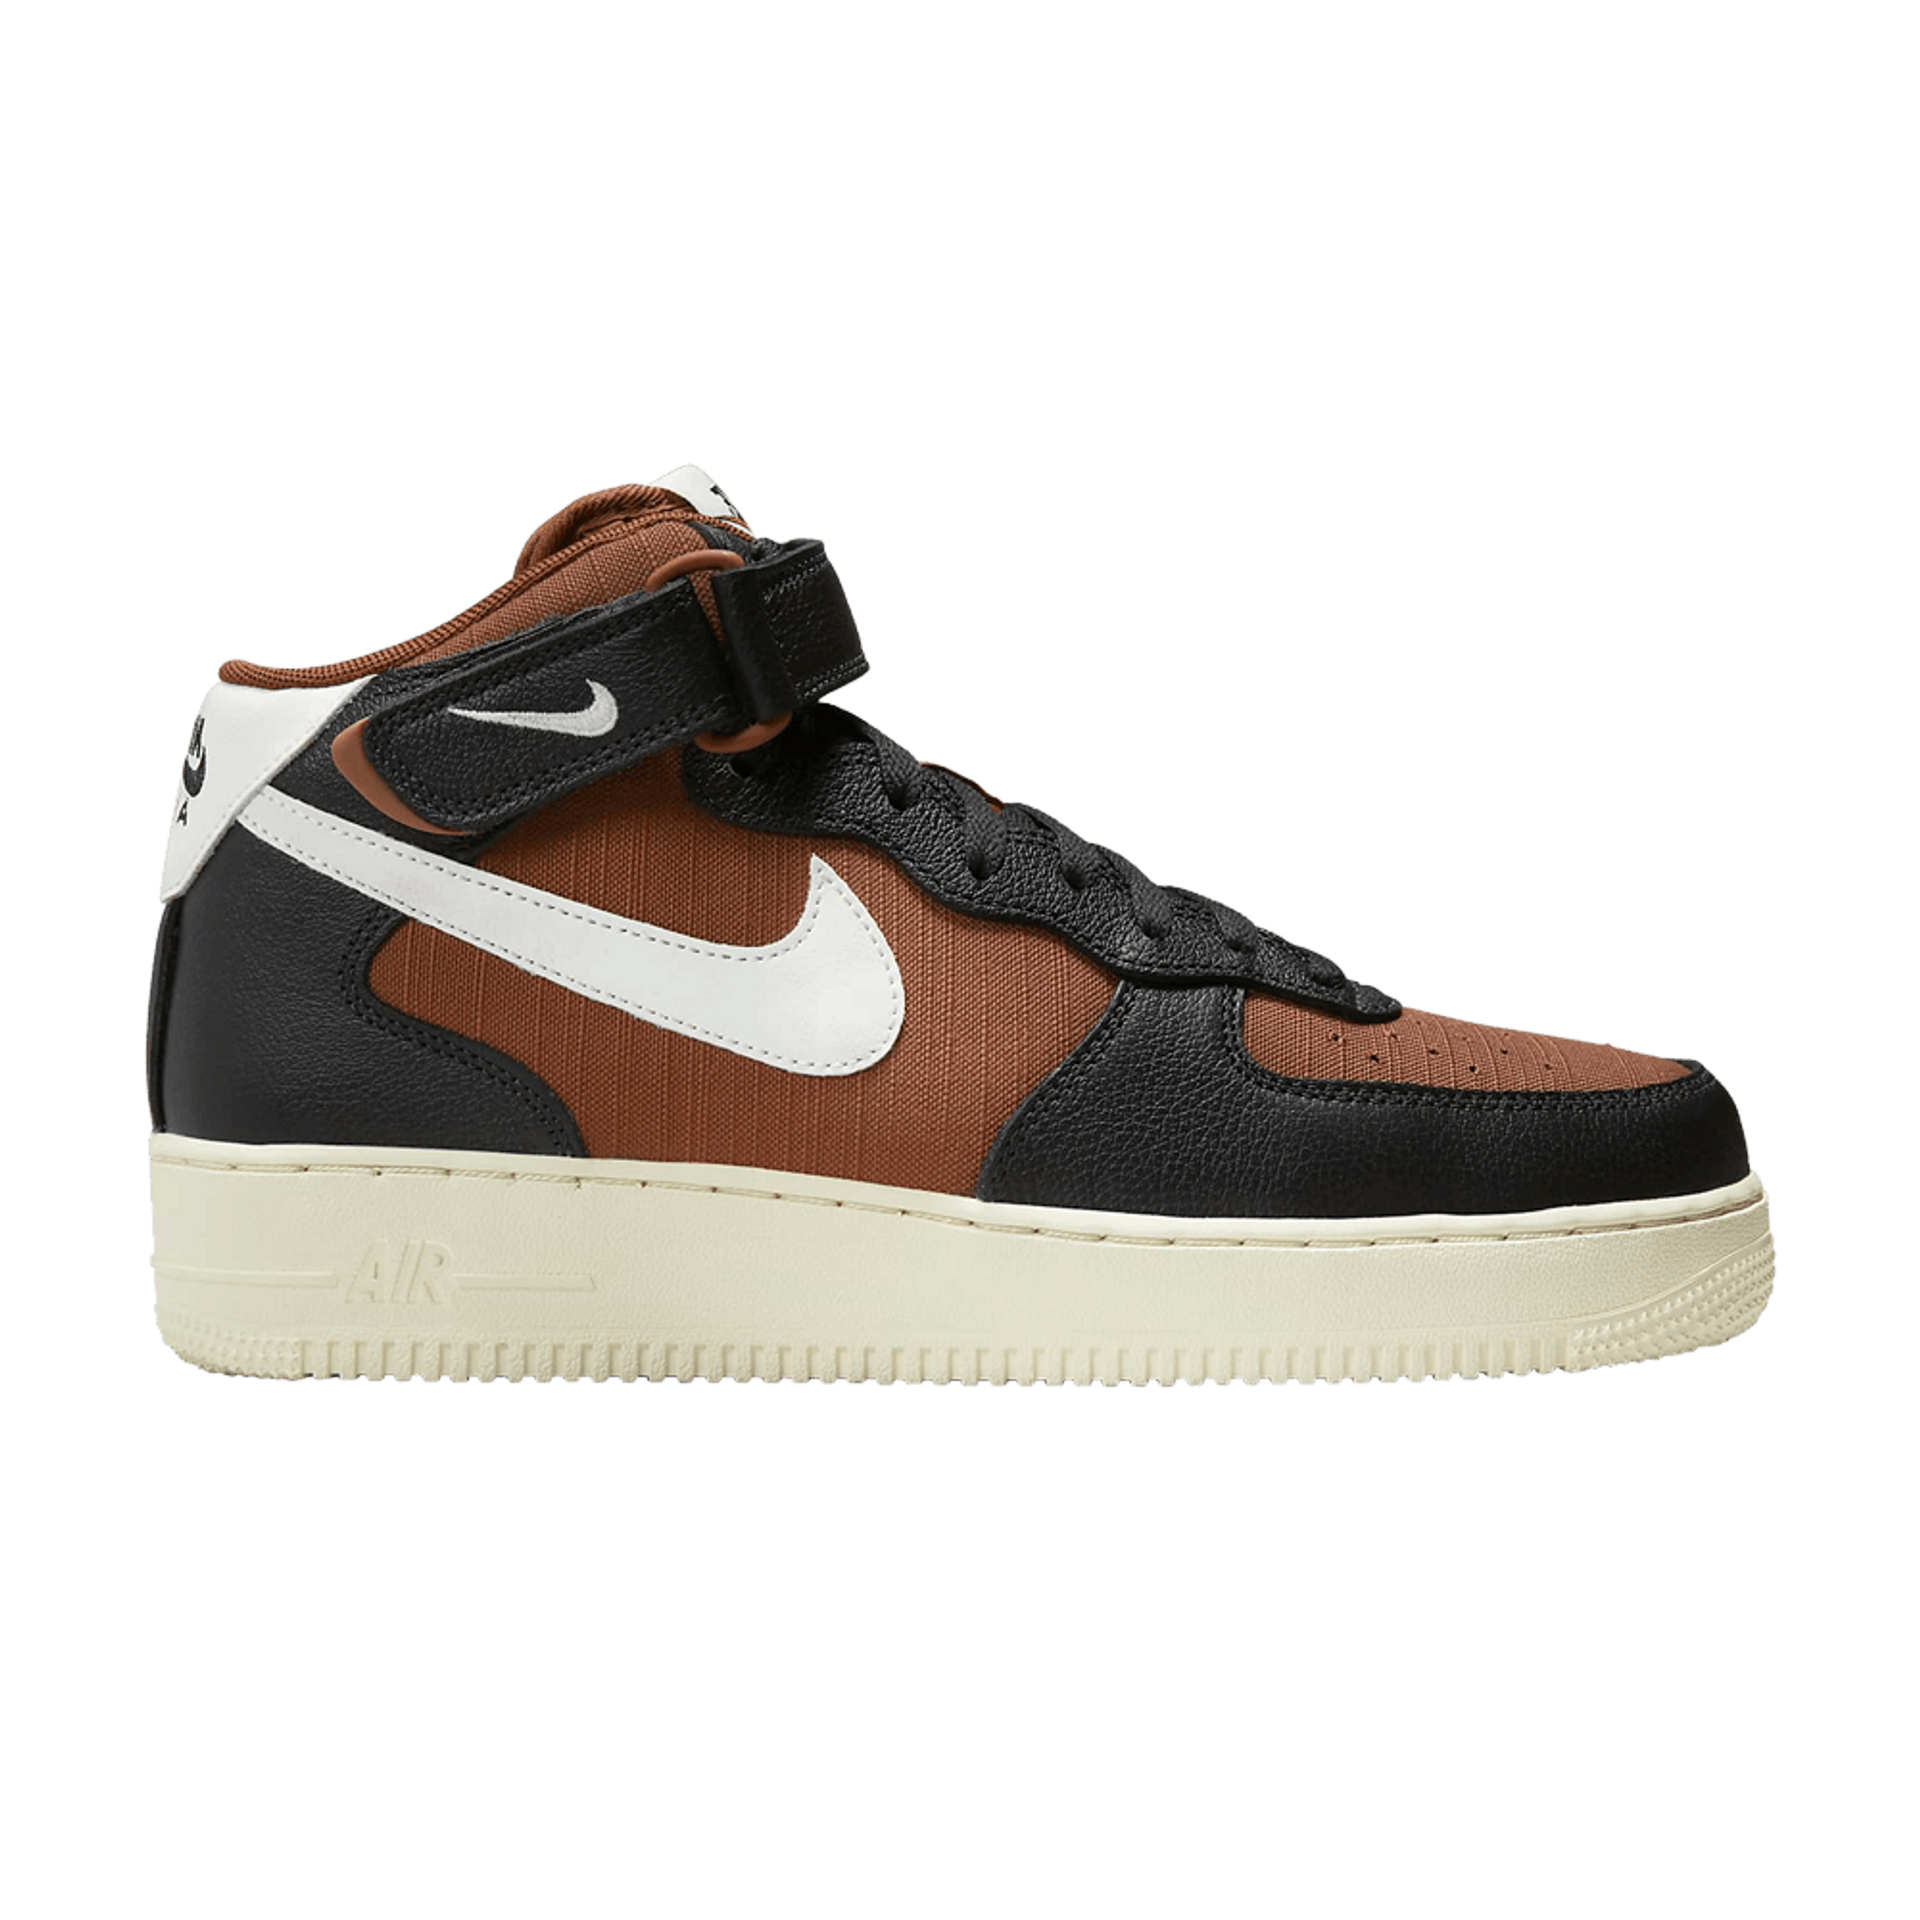 Nike Air Force 1 Mid '07 LX 'Certified Fresh - Pecan' - DQ8766 001 | Ox ...